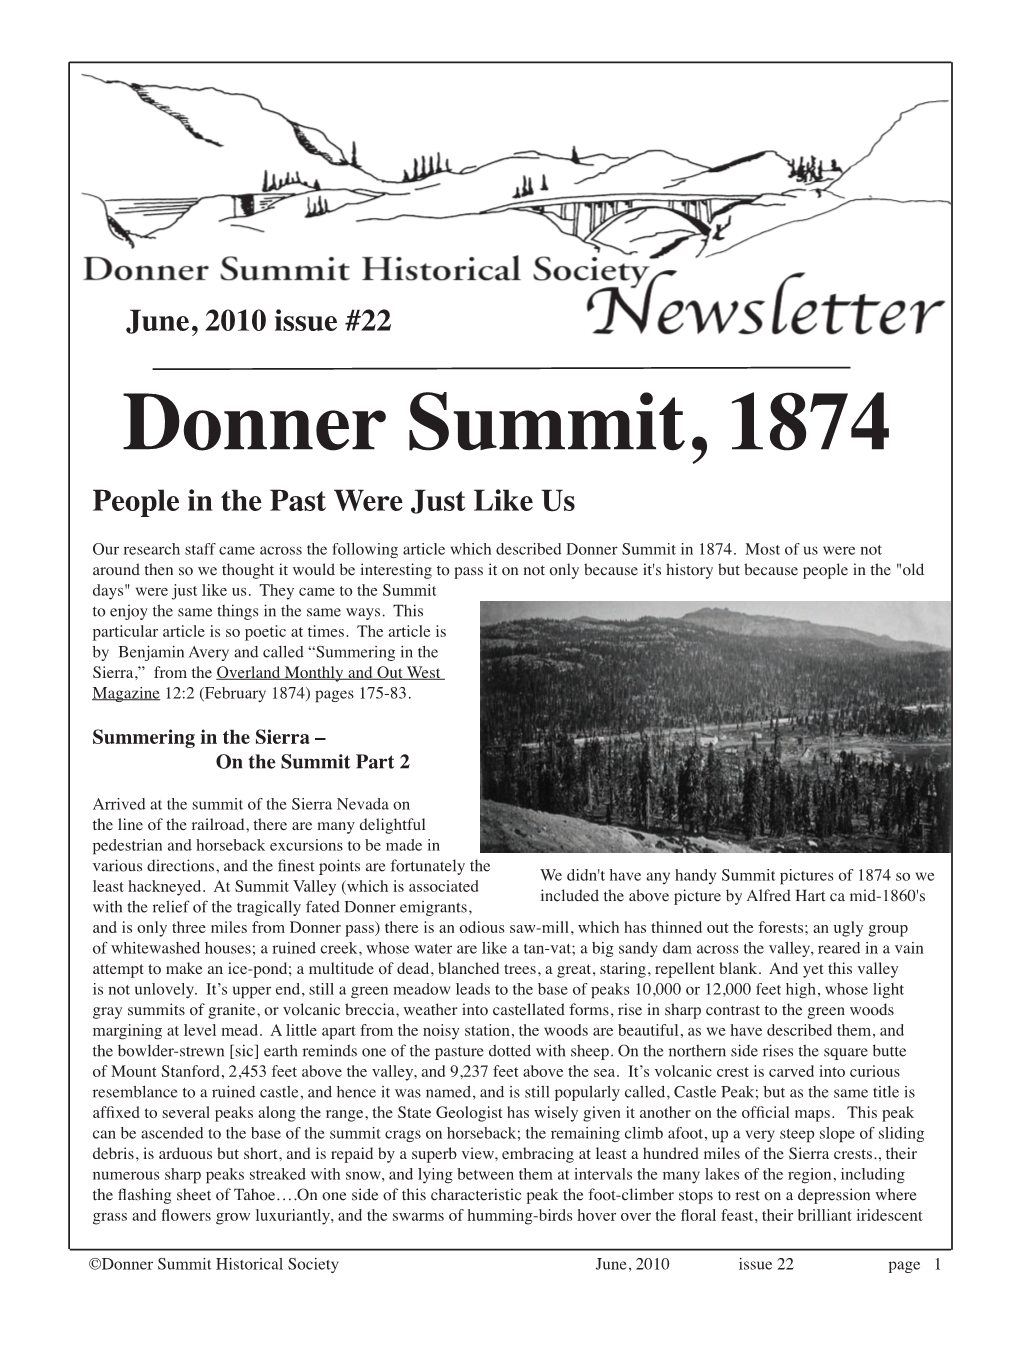 Donner Summit, 1874 People in the Past Were Just Like Us